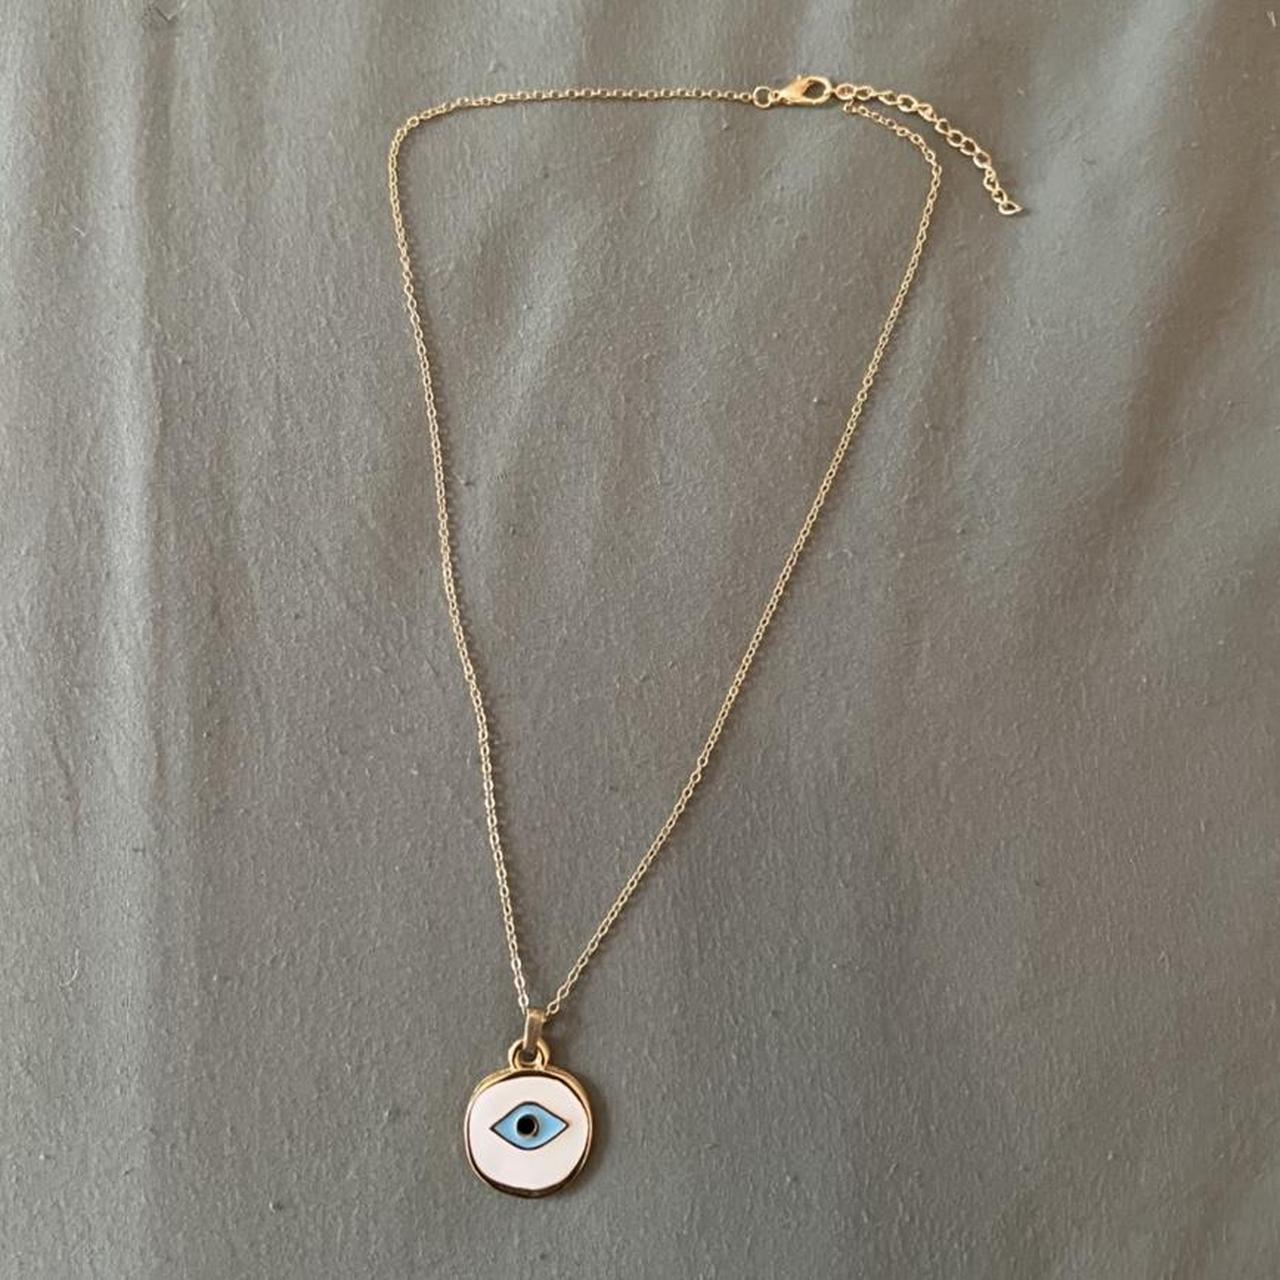 Free People Women's White and Gold Jewellery (2)